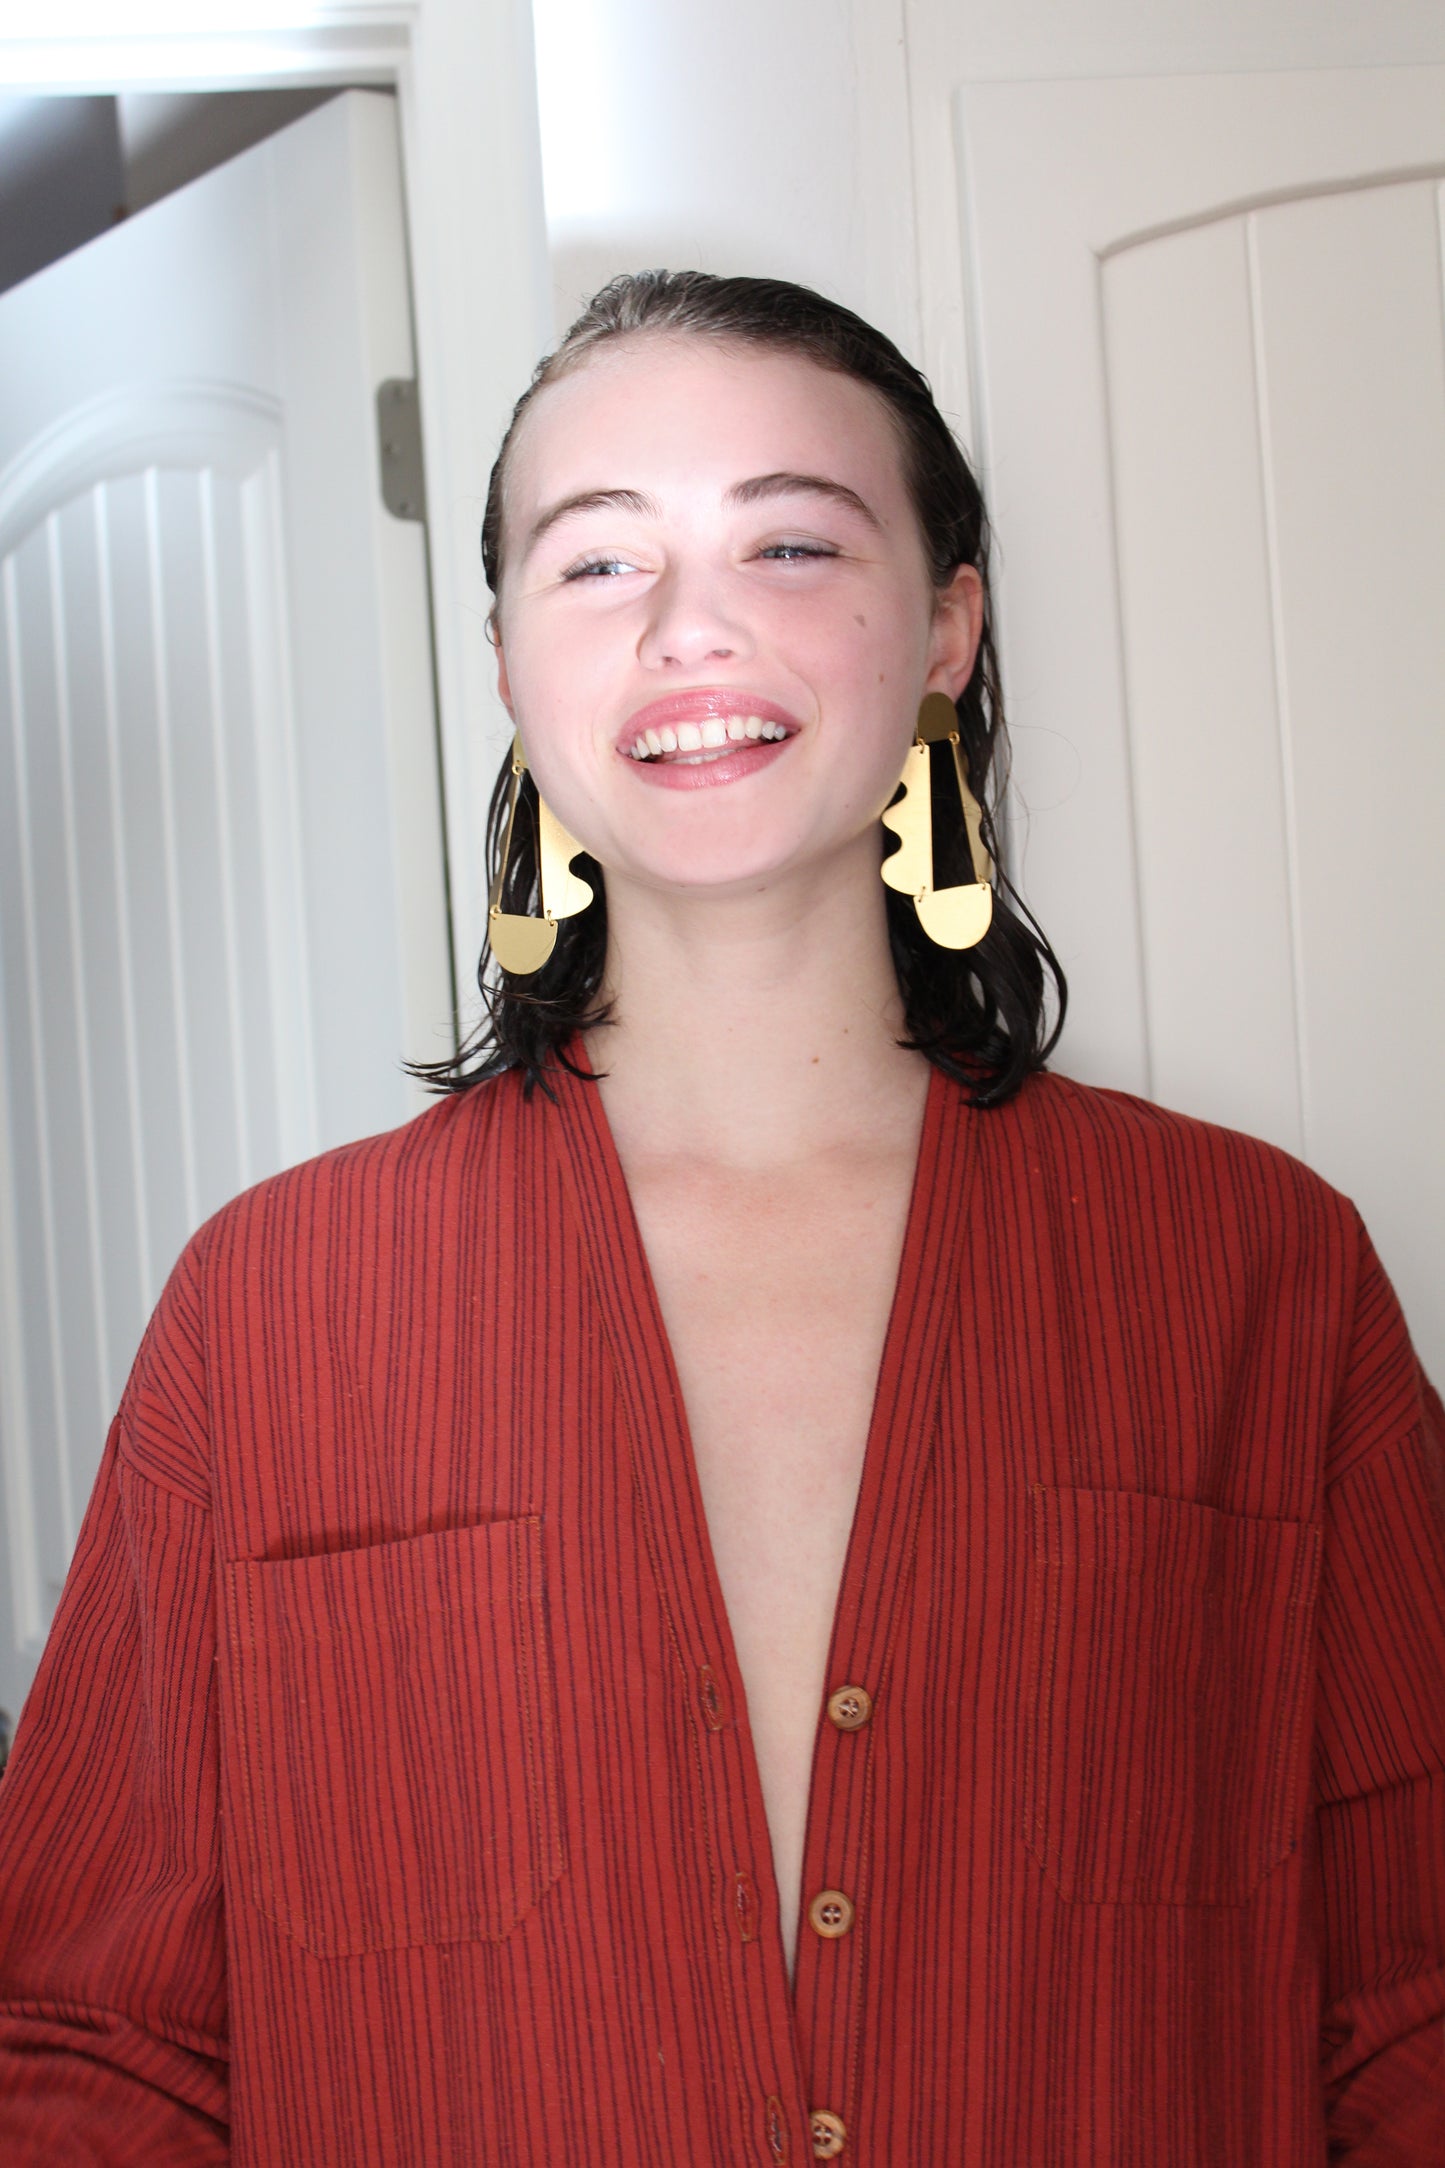 Annie Costello Brown Matisse Earrings Gold